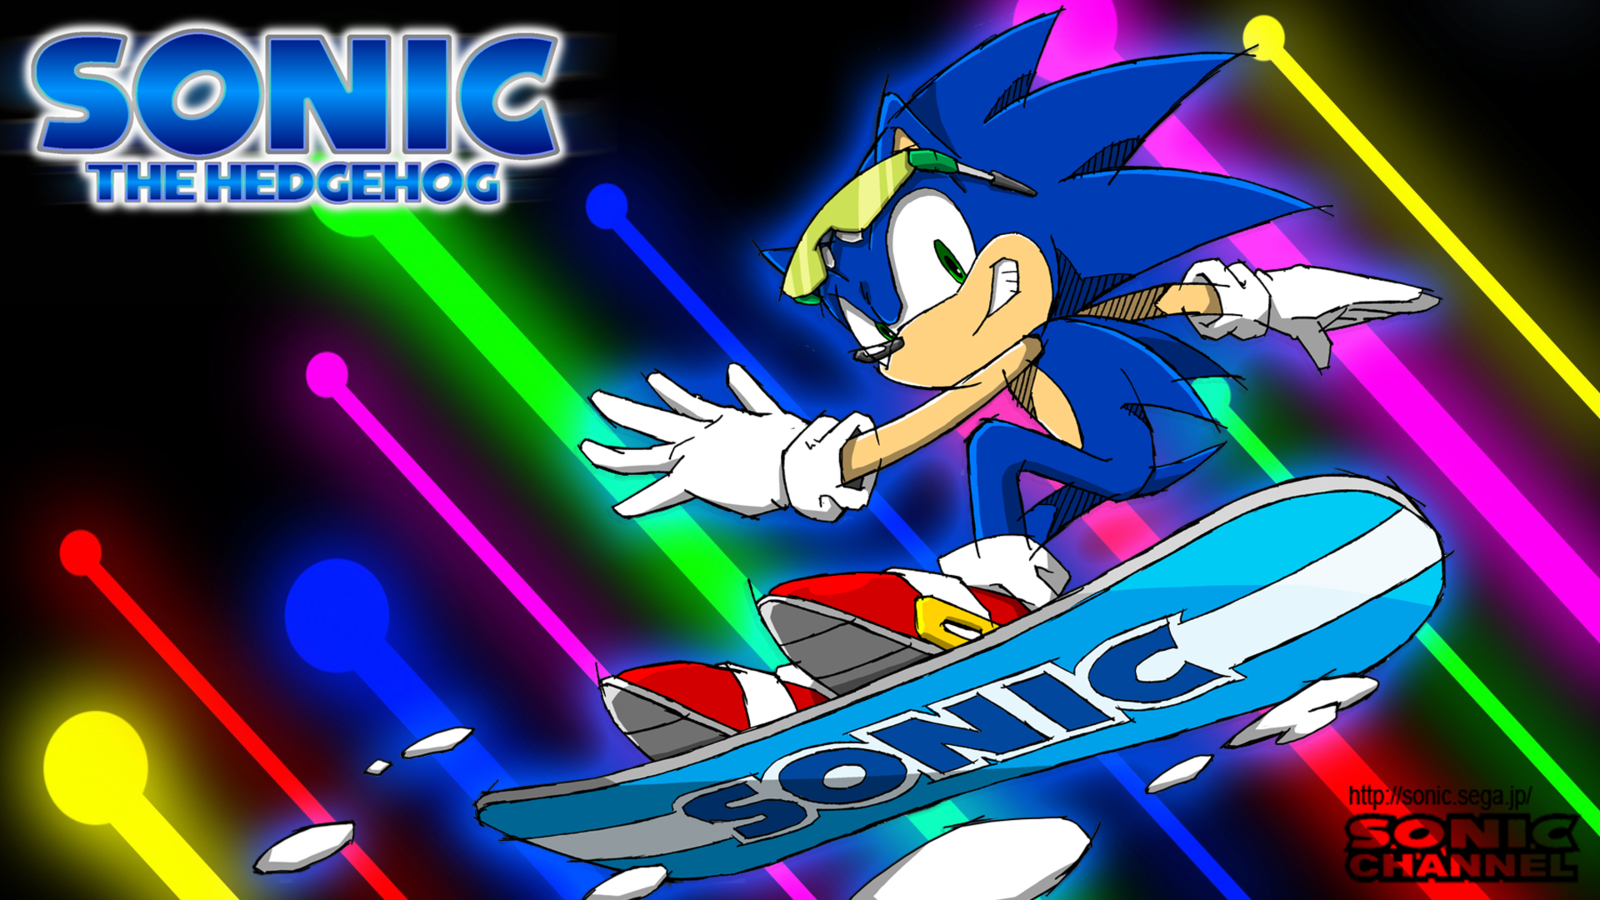 Sonic The Hedgehog Wallpaper by Sonicking9 on DeviantArt